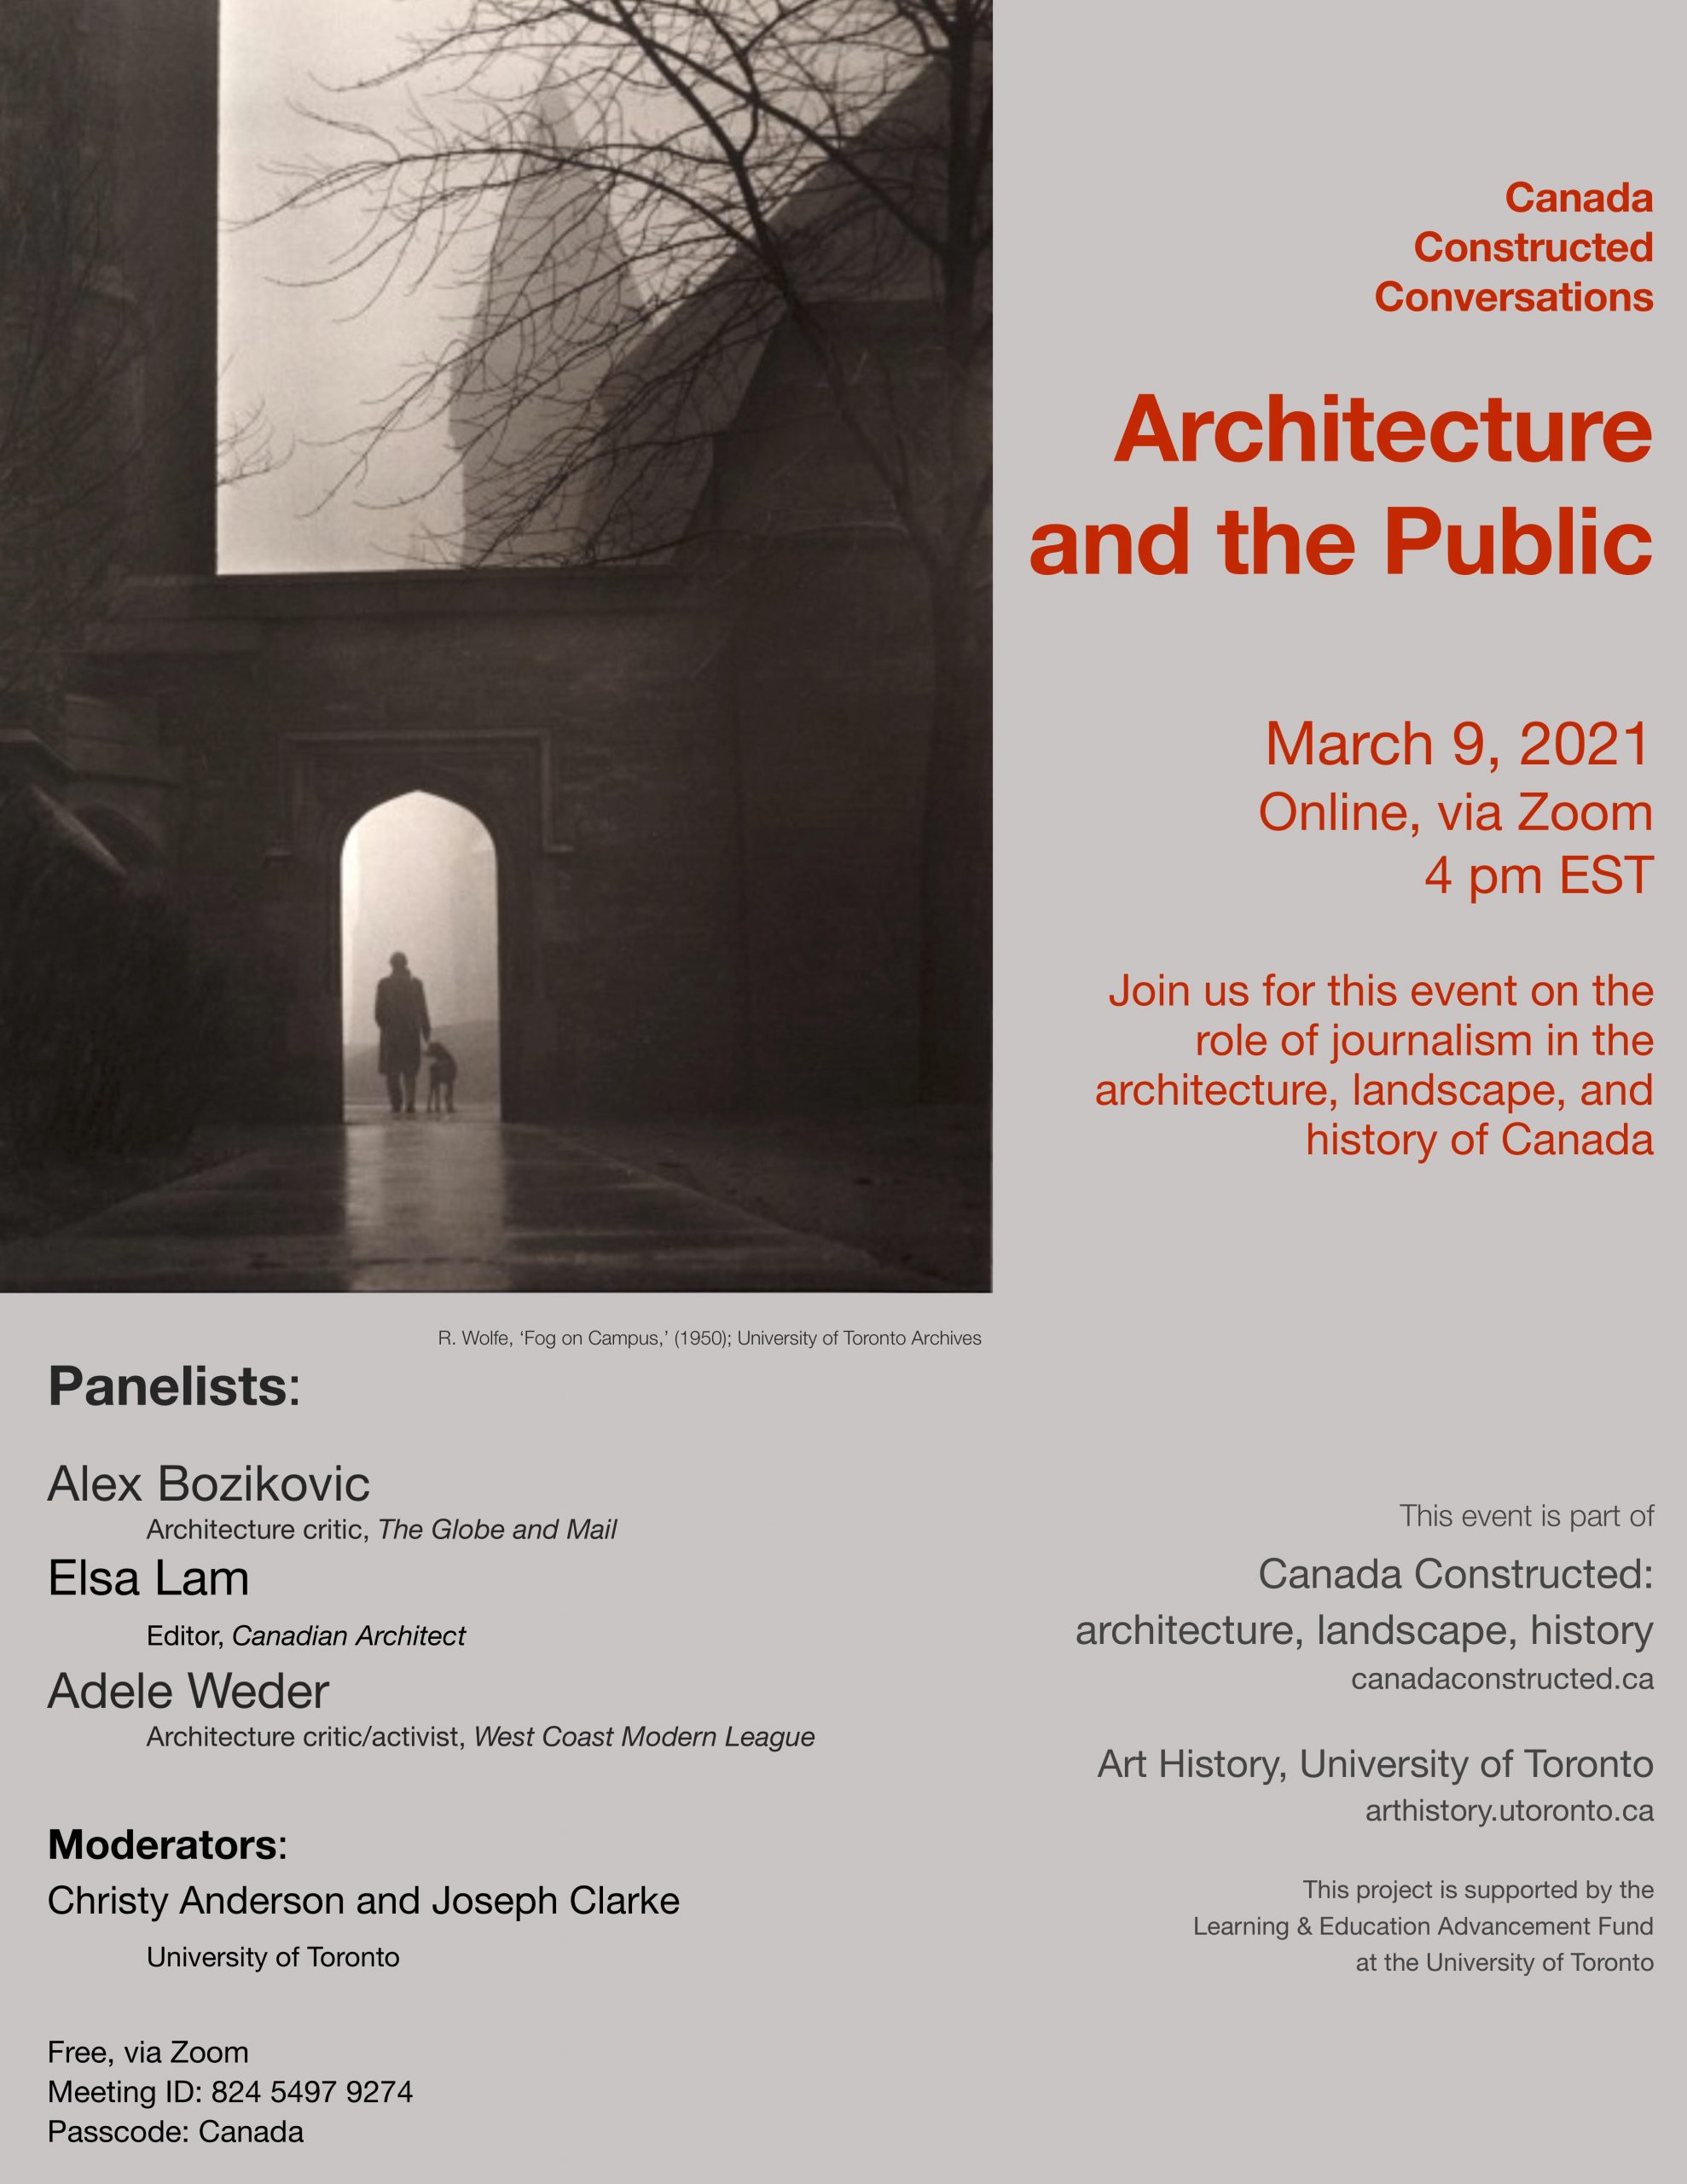 Canada Constructed: Architecture and the Public